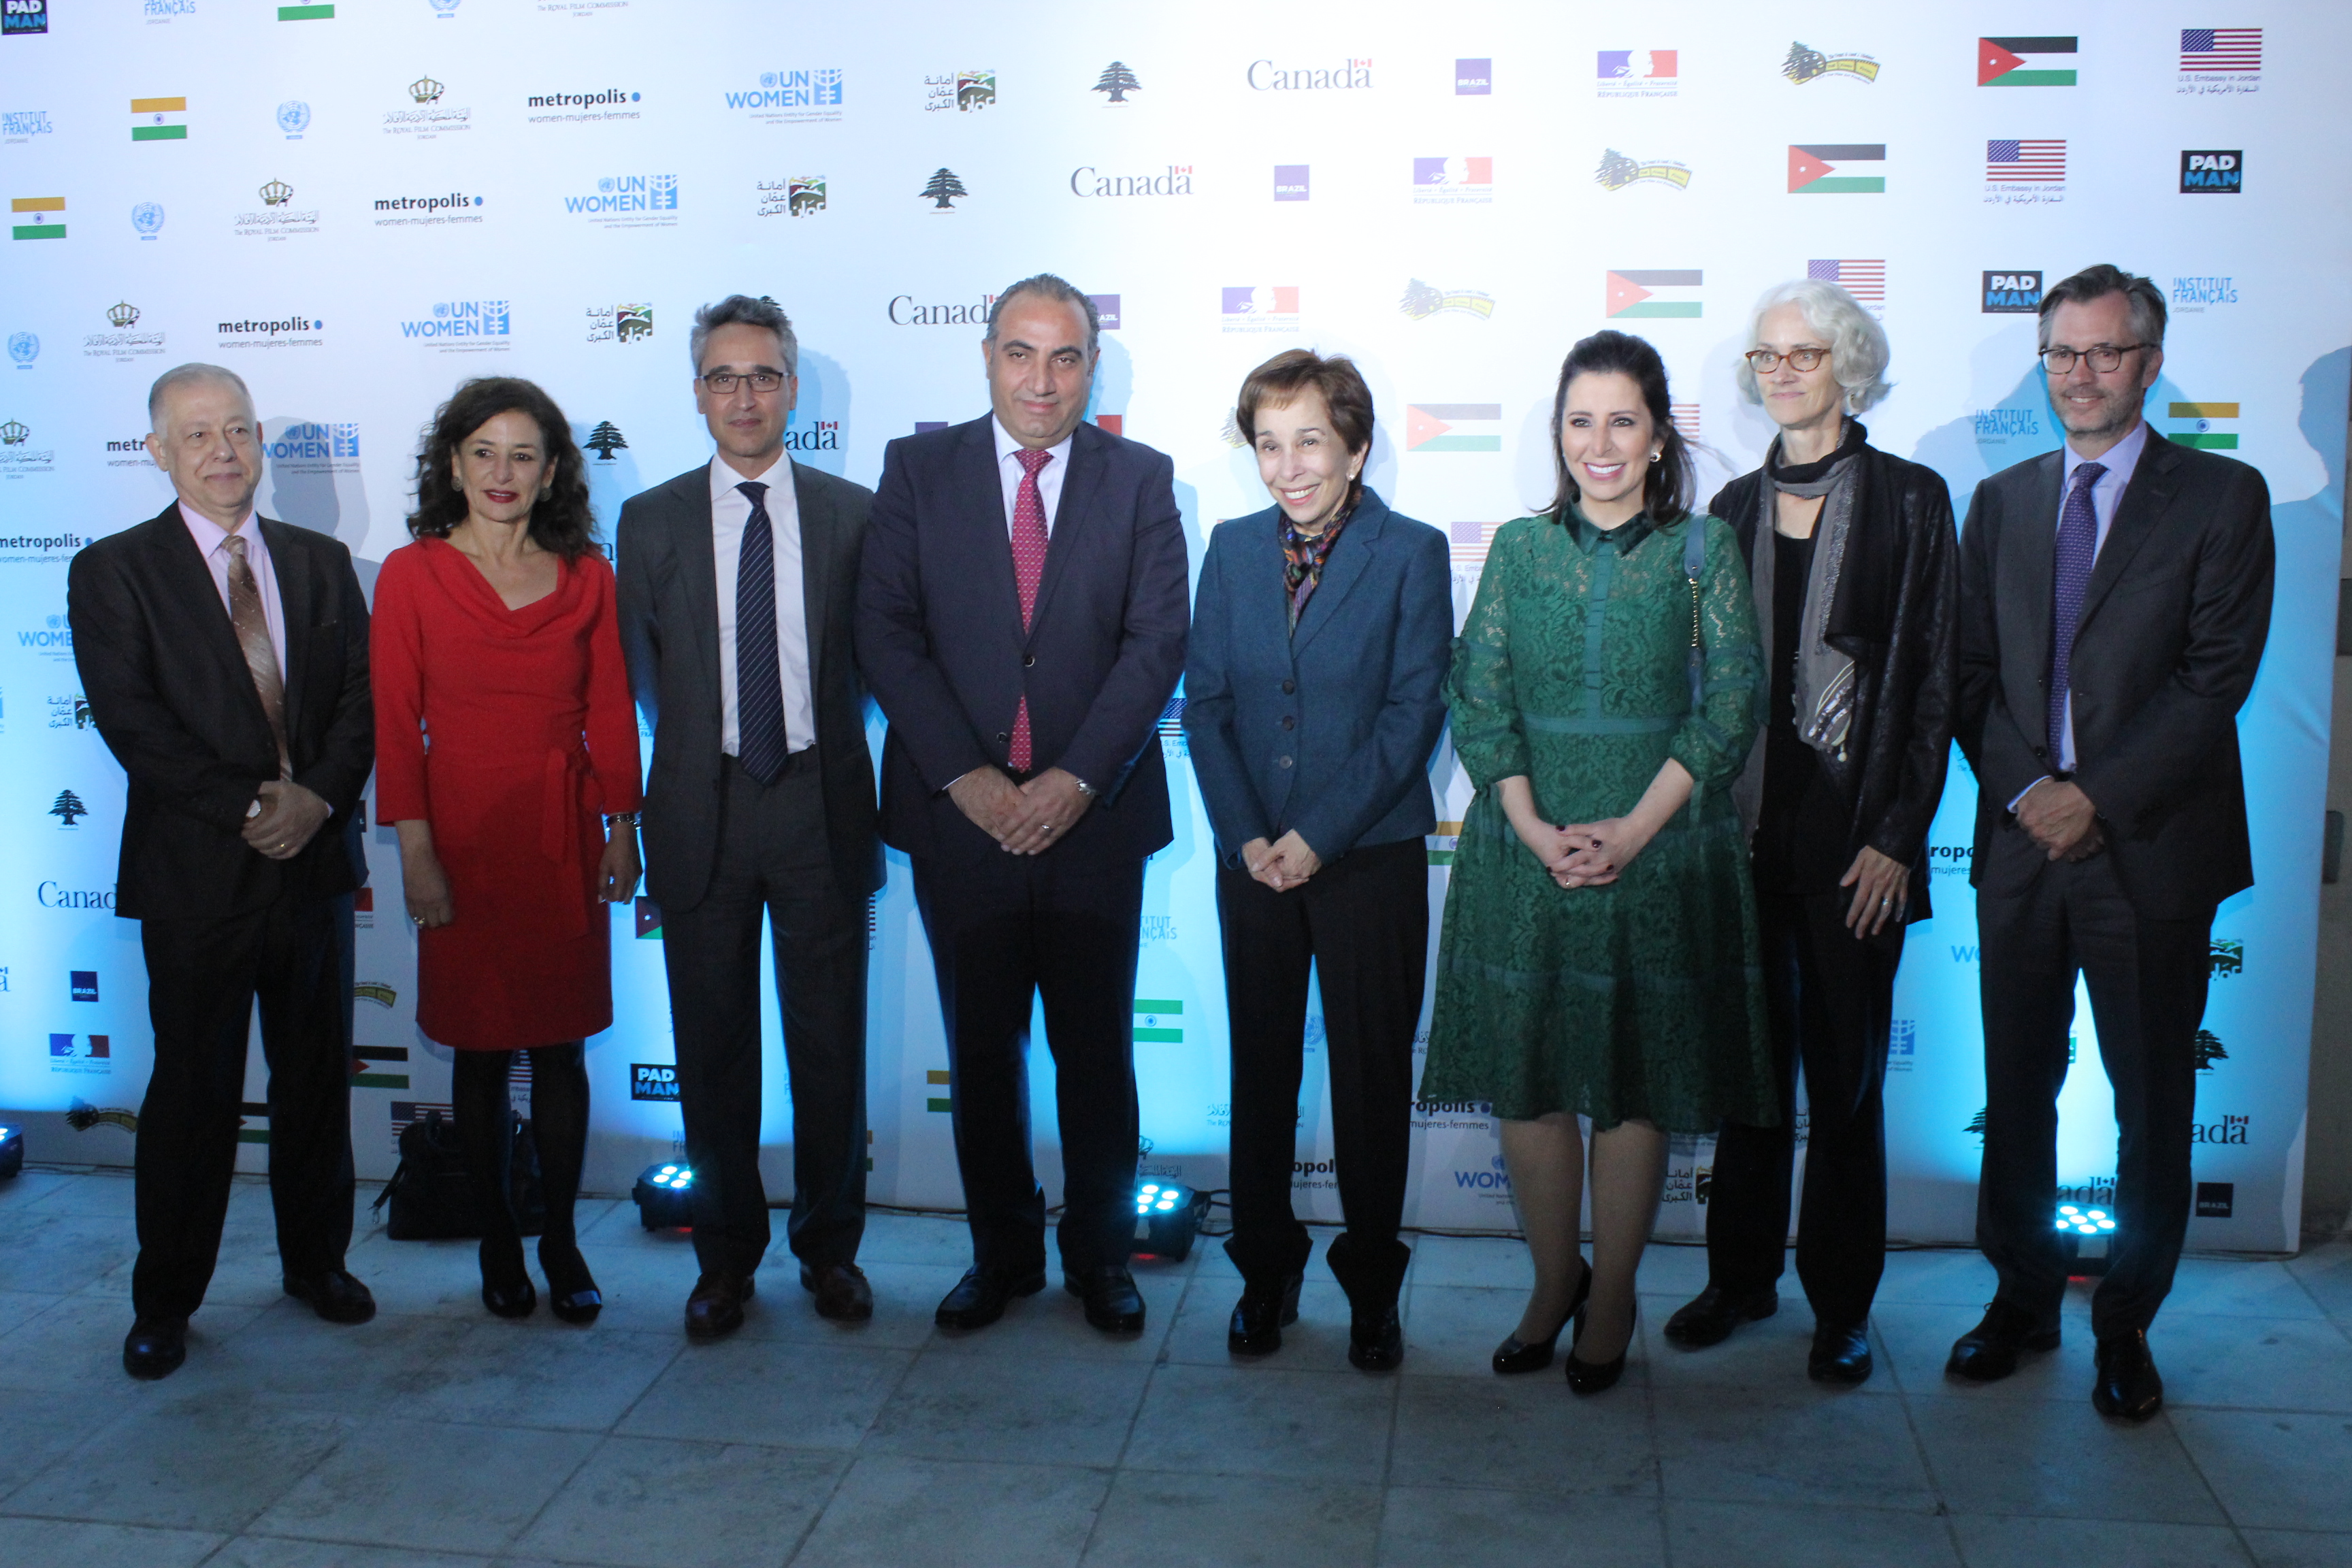 Mr Elie Nimri, Lebanese film producer; Nada Doumani, Royal Film Commission Communication and Cultural Programming Manager; Mr. Ziad Sheikh, UN Women Jordan Country Representative; HE Dr. Yousef Shawarbeh, Mayor of the Greater Amman Municipality; Her Royal Highness Princess Basma Bint Talal; Ghada Saba, Artistic Director; Elizabeth Vibert, Canadian film producer; HE Mr. Peter Macdougall, Ambassador of Canada to Jordan attended the Launch of Women's Film Week 6th Edition.